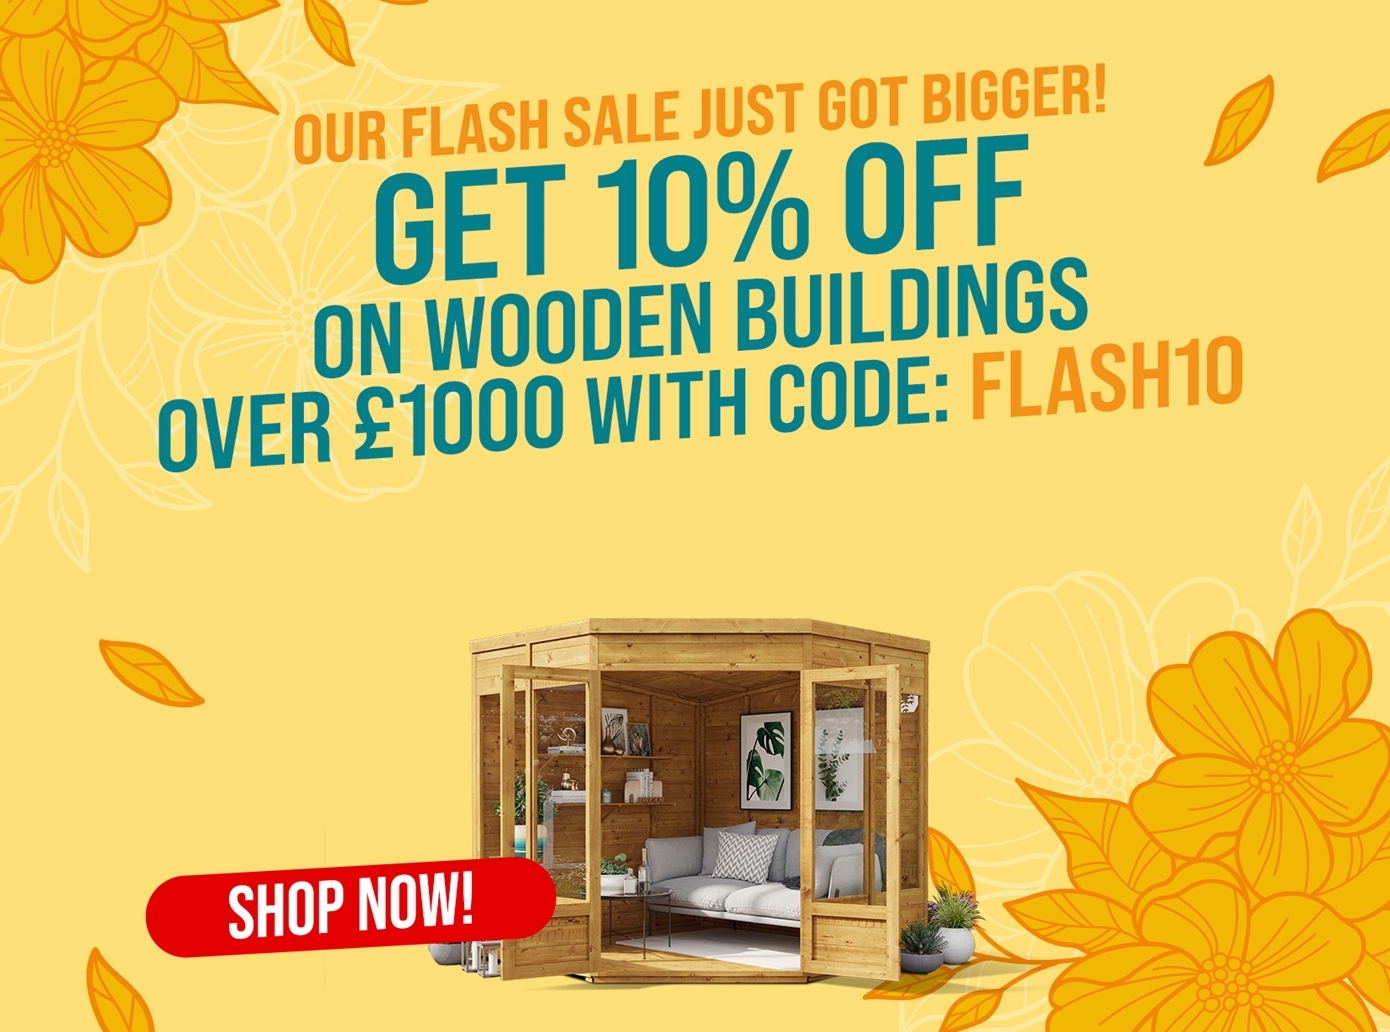 Flash sale! Save up to 50% on selected wooden buildings!